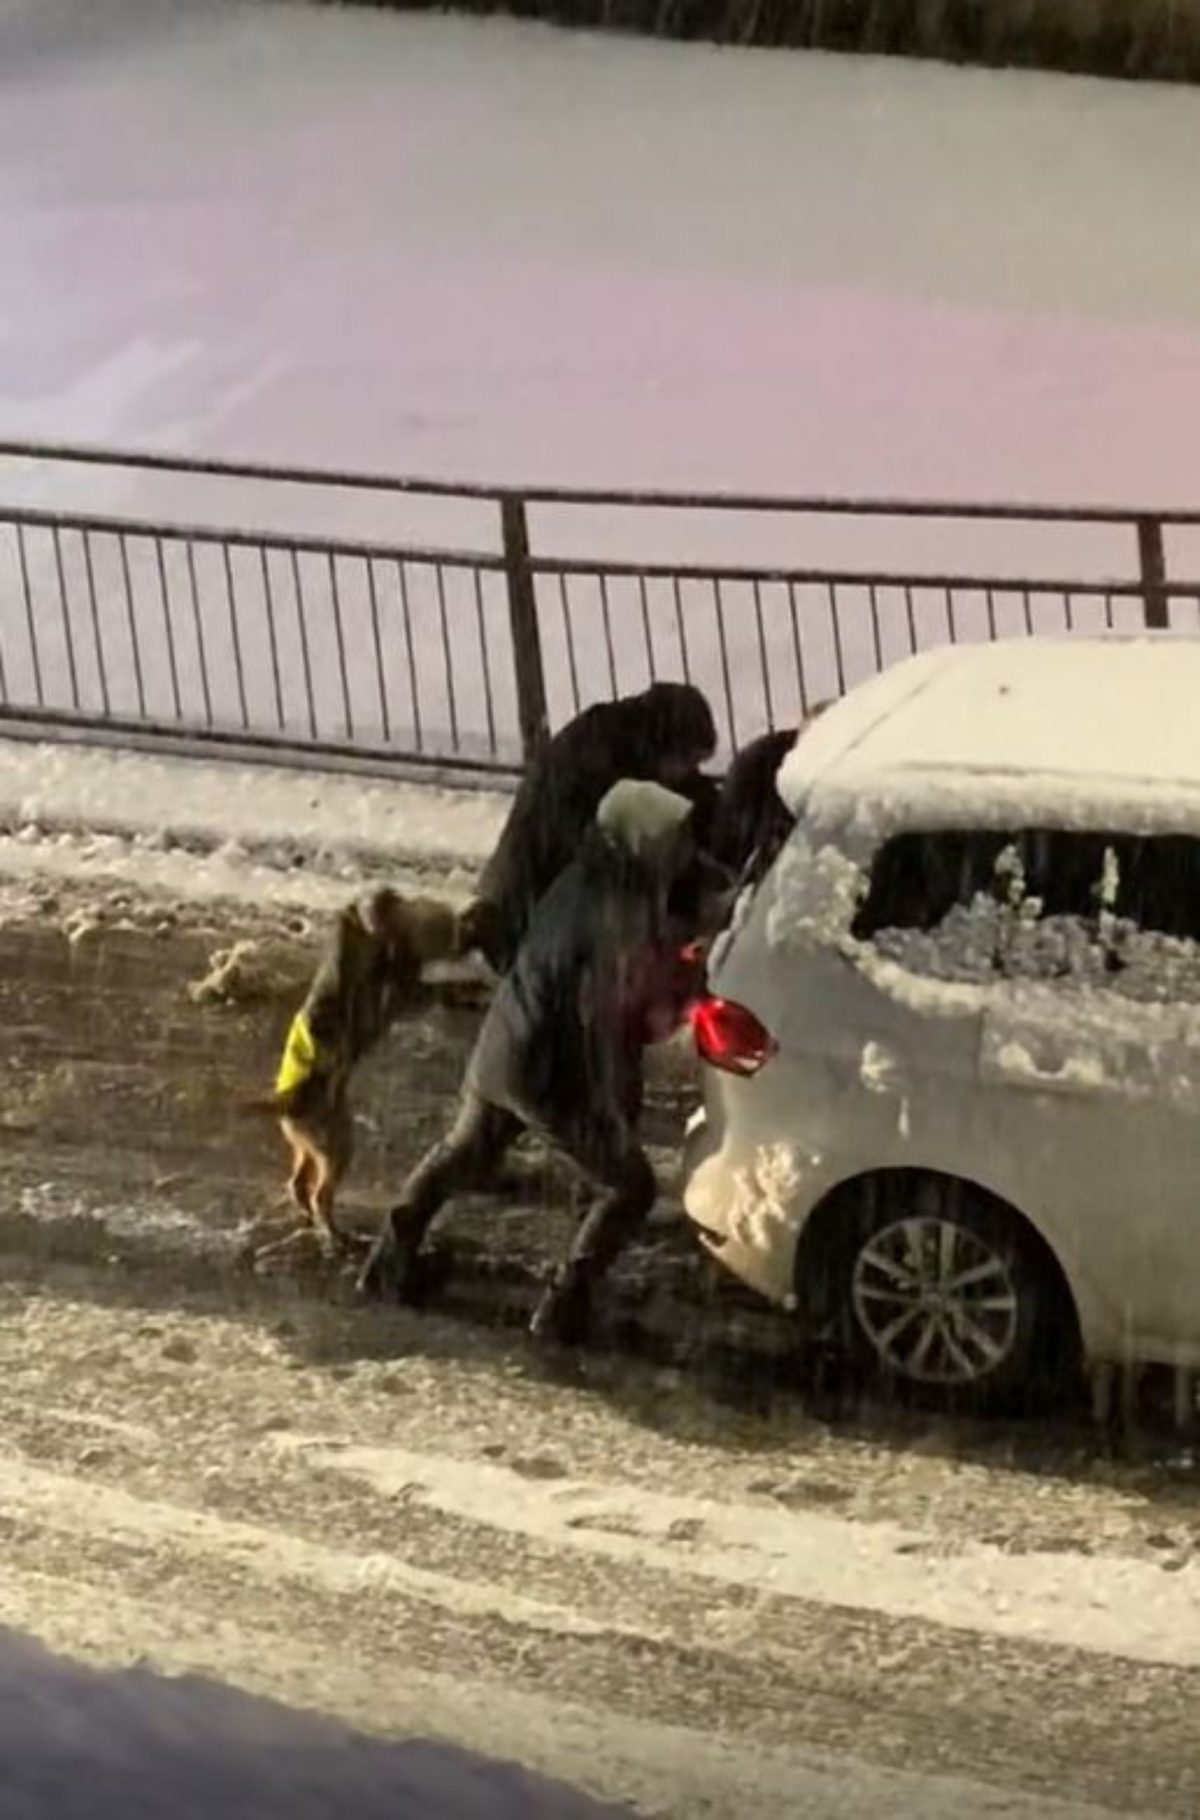 Three men push the car with the dog